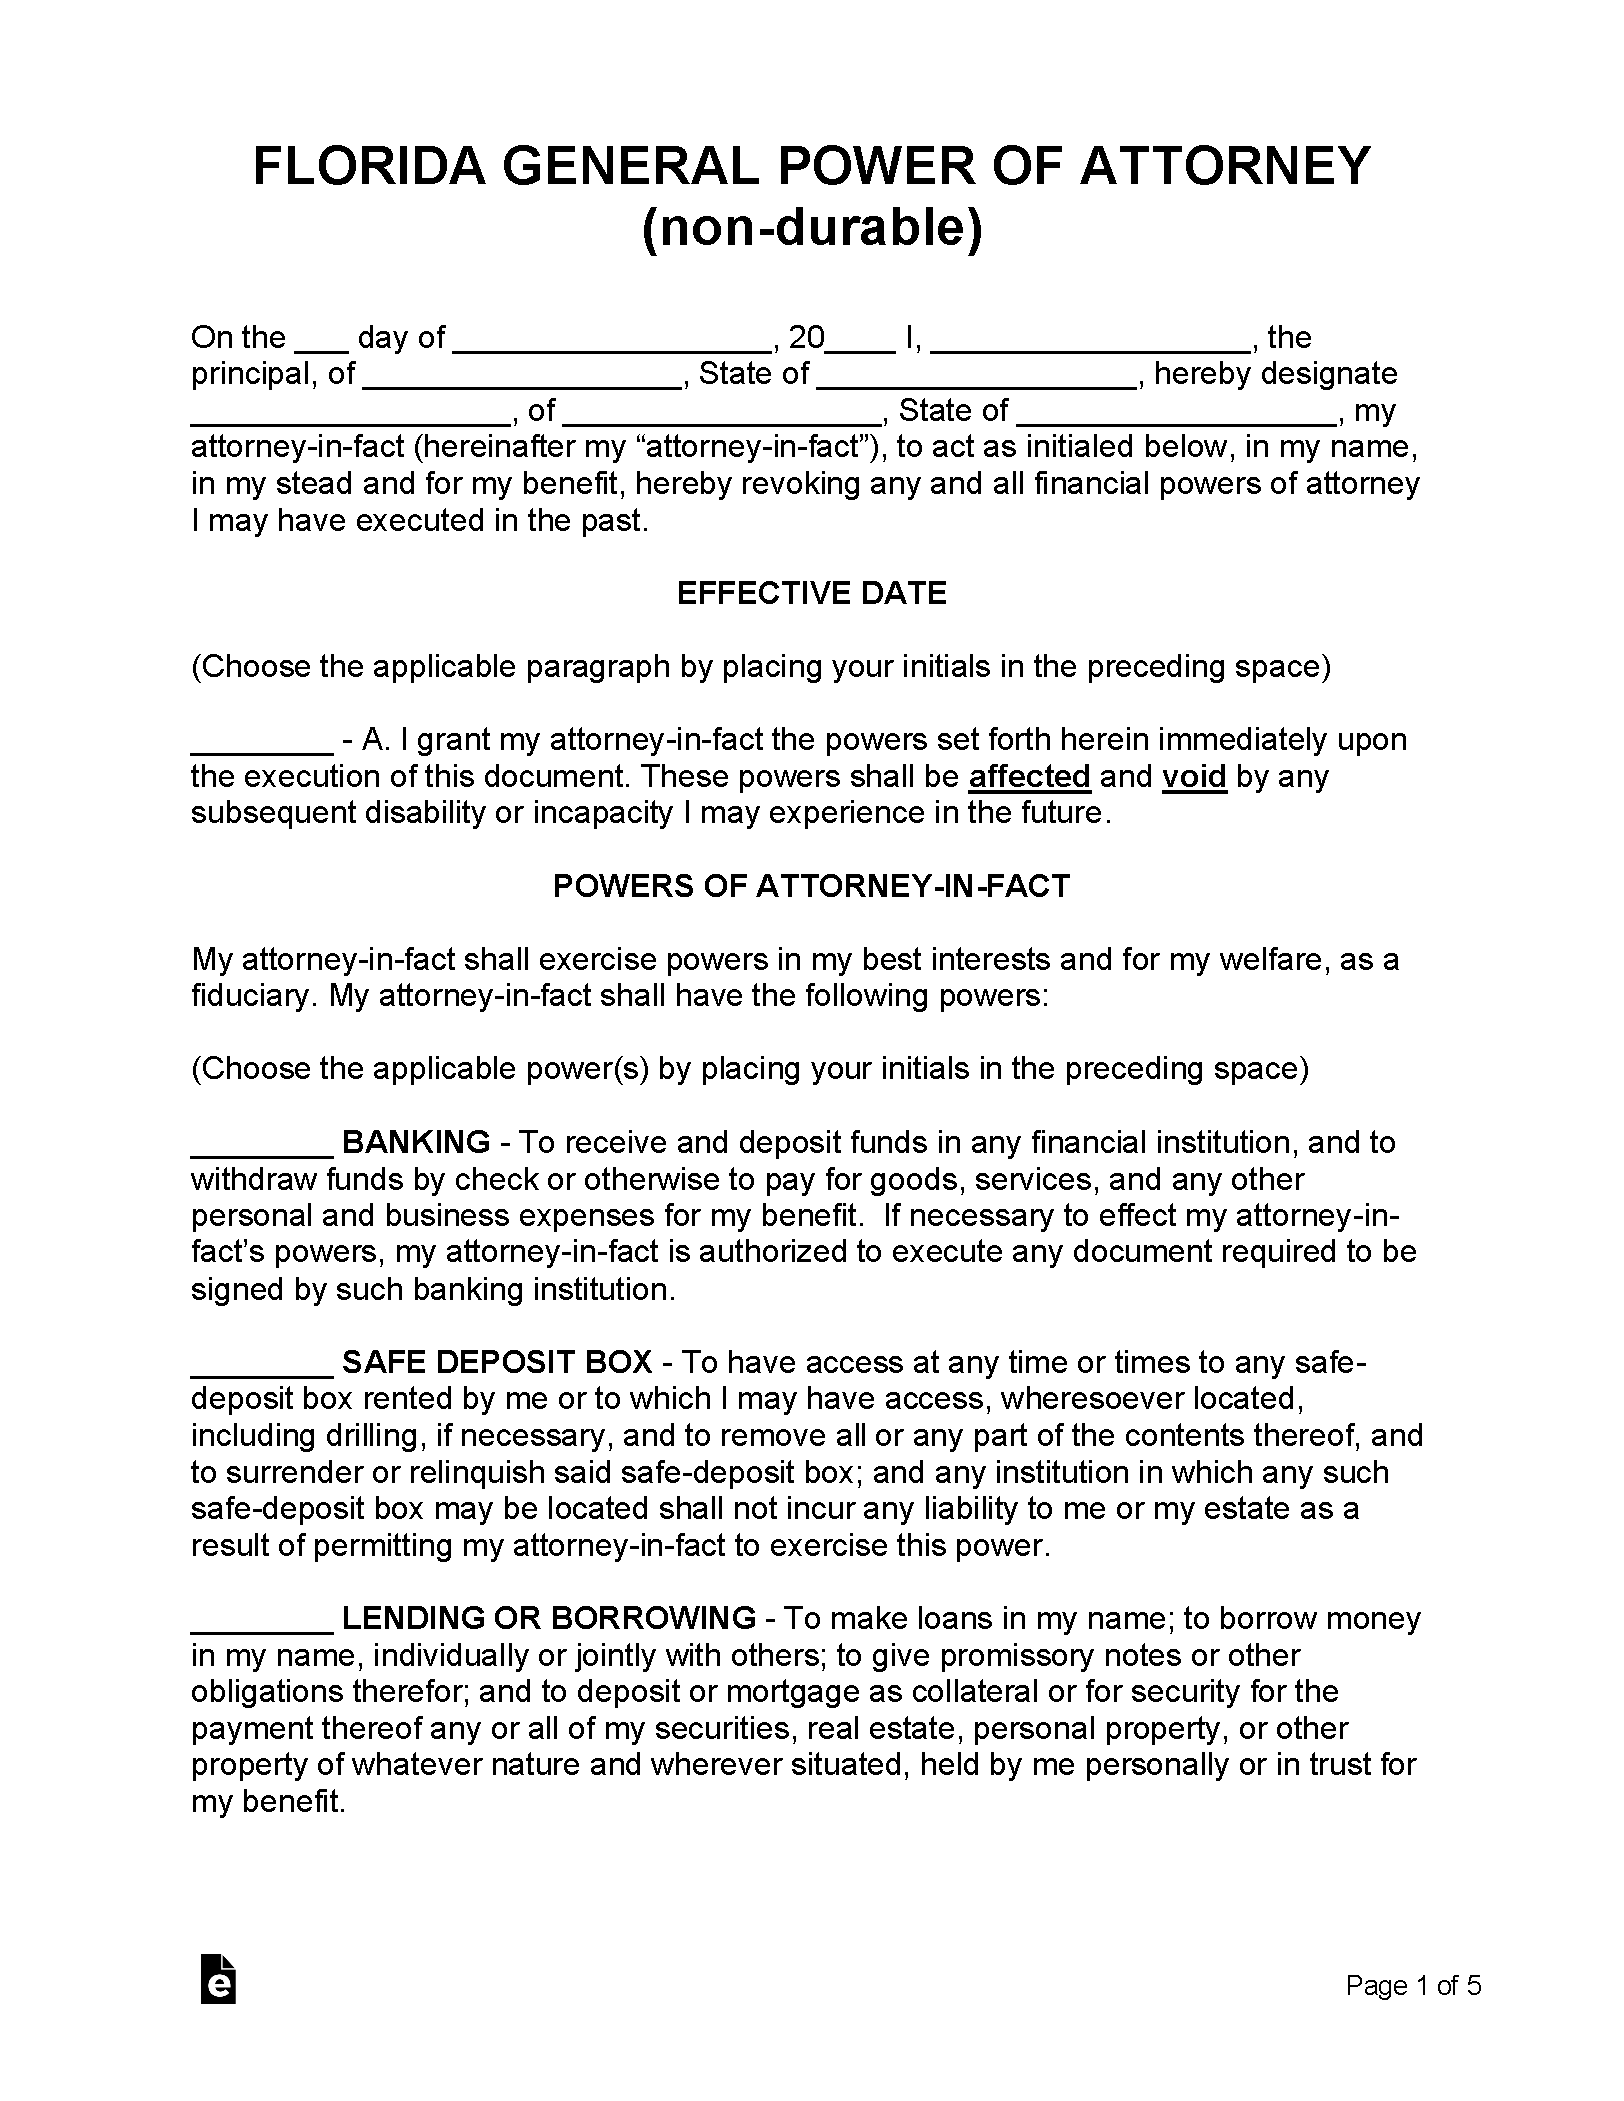 Florida General Power of Attorney Form